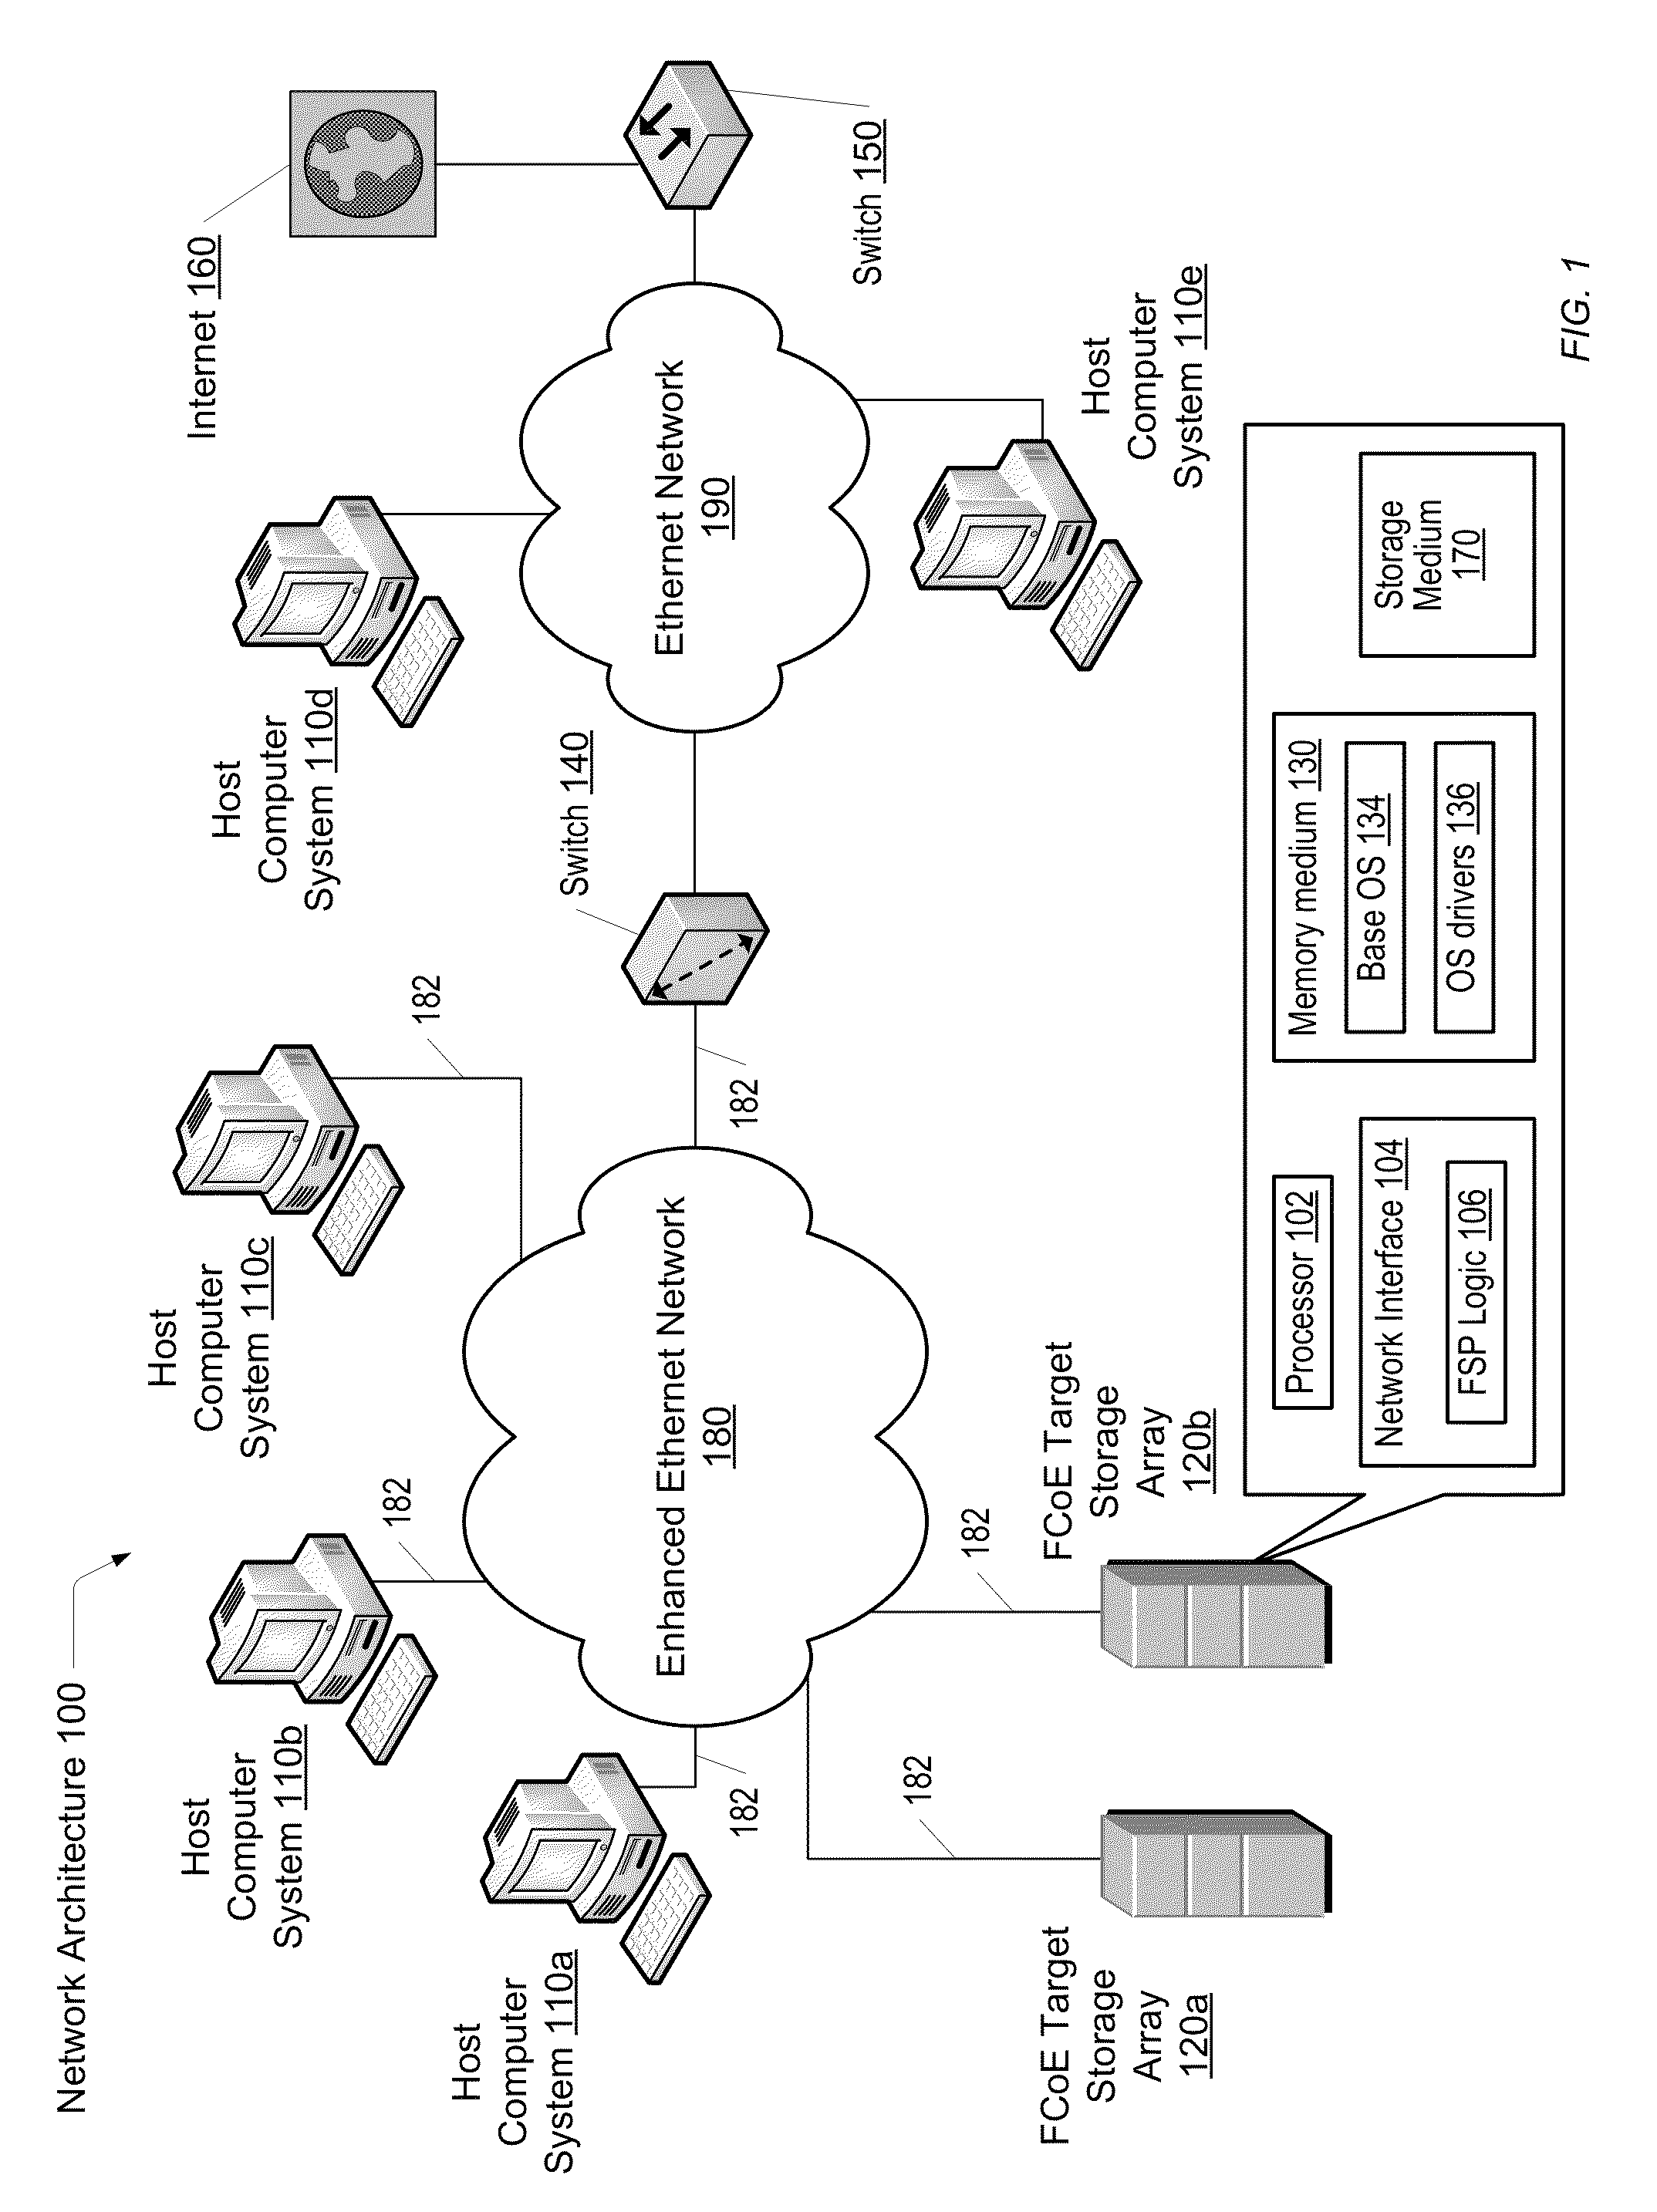 System and method for supporting fibre channel over ethernet communication